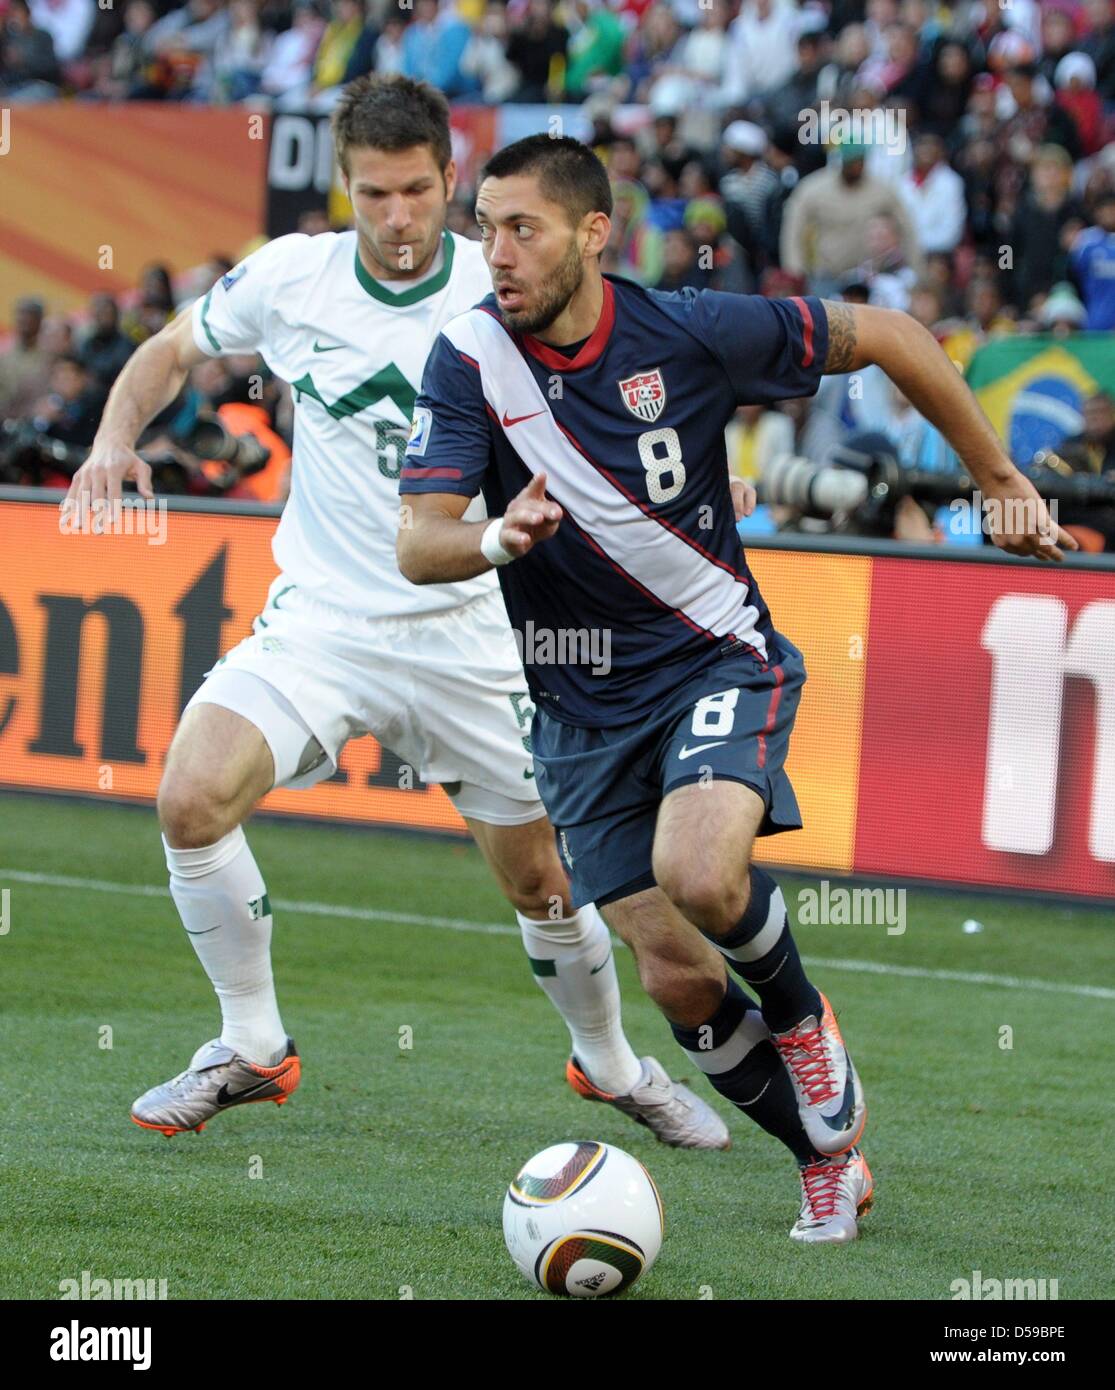 Bostjan Cesar of Slovenia (L) vies with Clint Dempsey of the USA during the FIFA World Cup 2010 group C match between Slovenia and USA at the Ellis Park Stadium in Johannesburg, South Africa 18 June 2010. Photo: Ronald Wittek dpa - Please refer to http://dpaq.de/FIFA-WM2010-TC Stock Photo